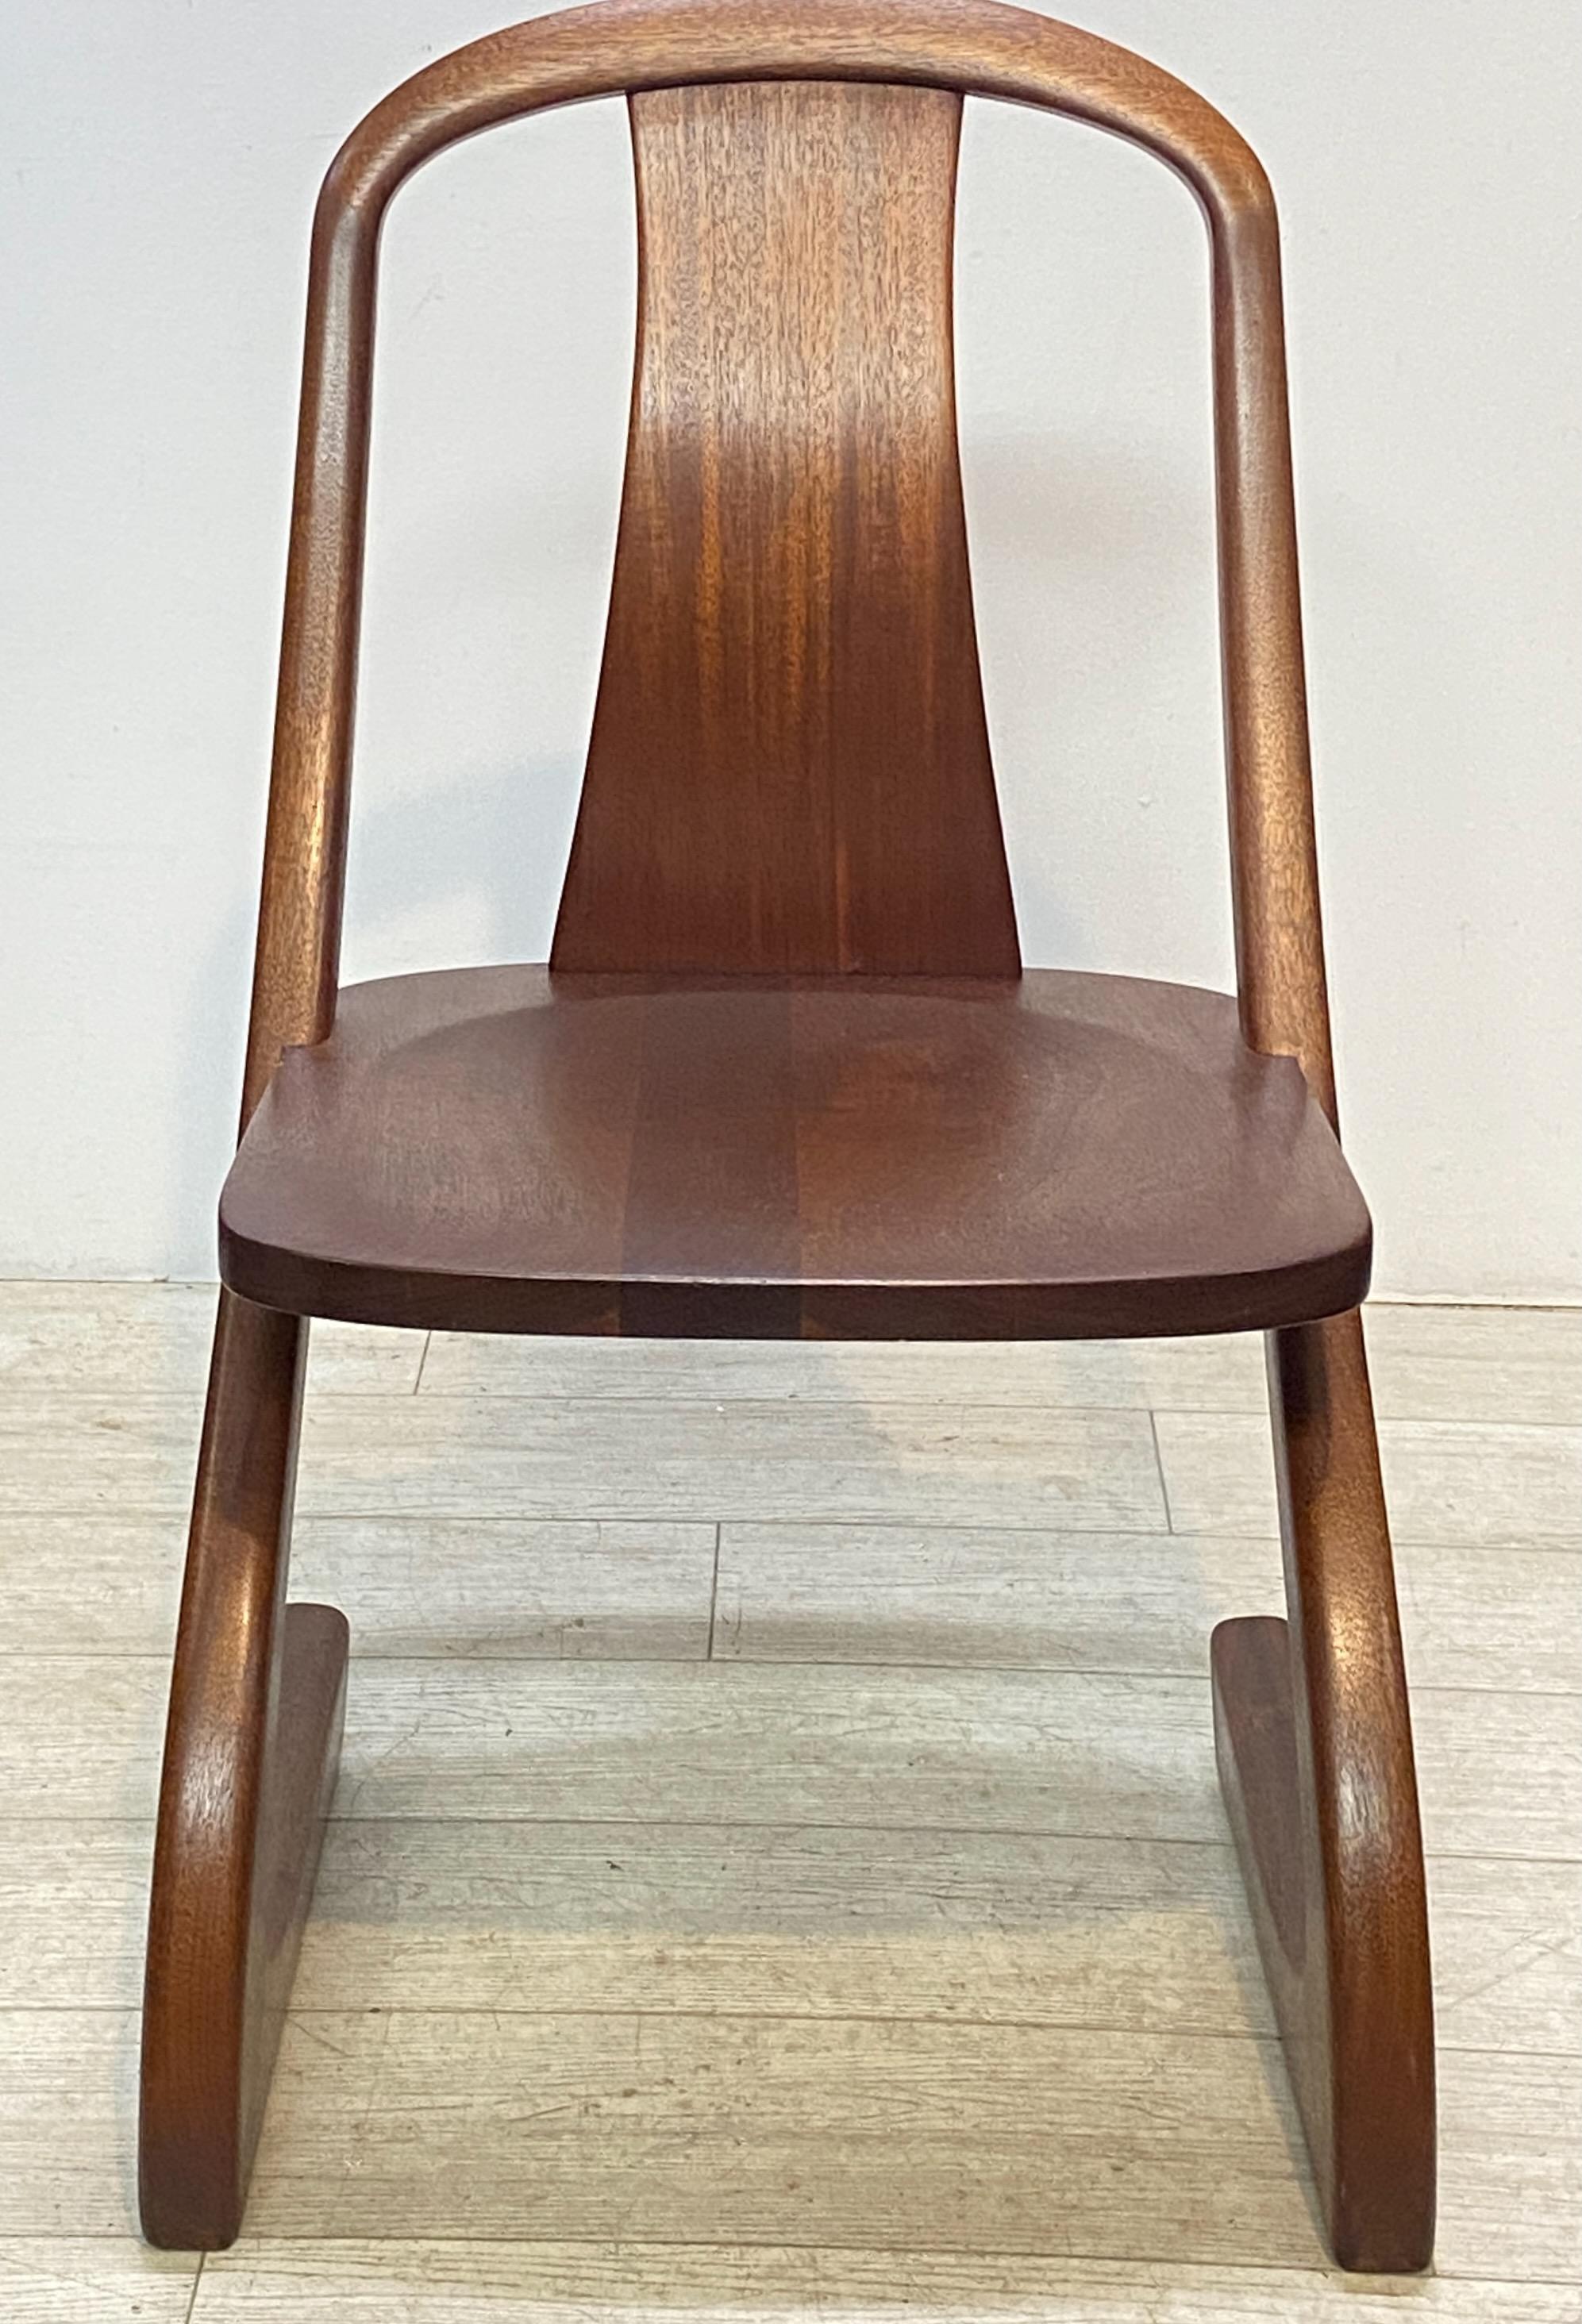 American Mid Century California Modern Mahogany Chair, Signed GS For Sale